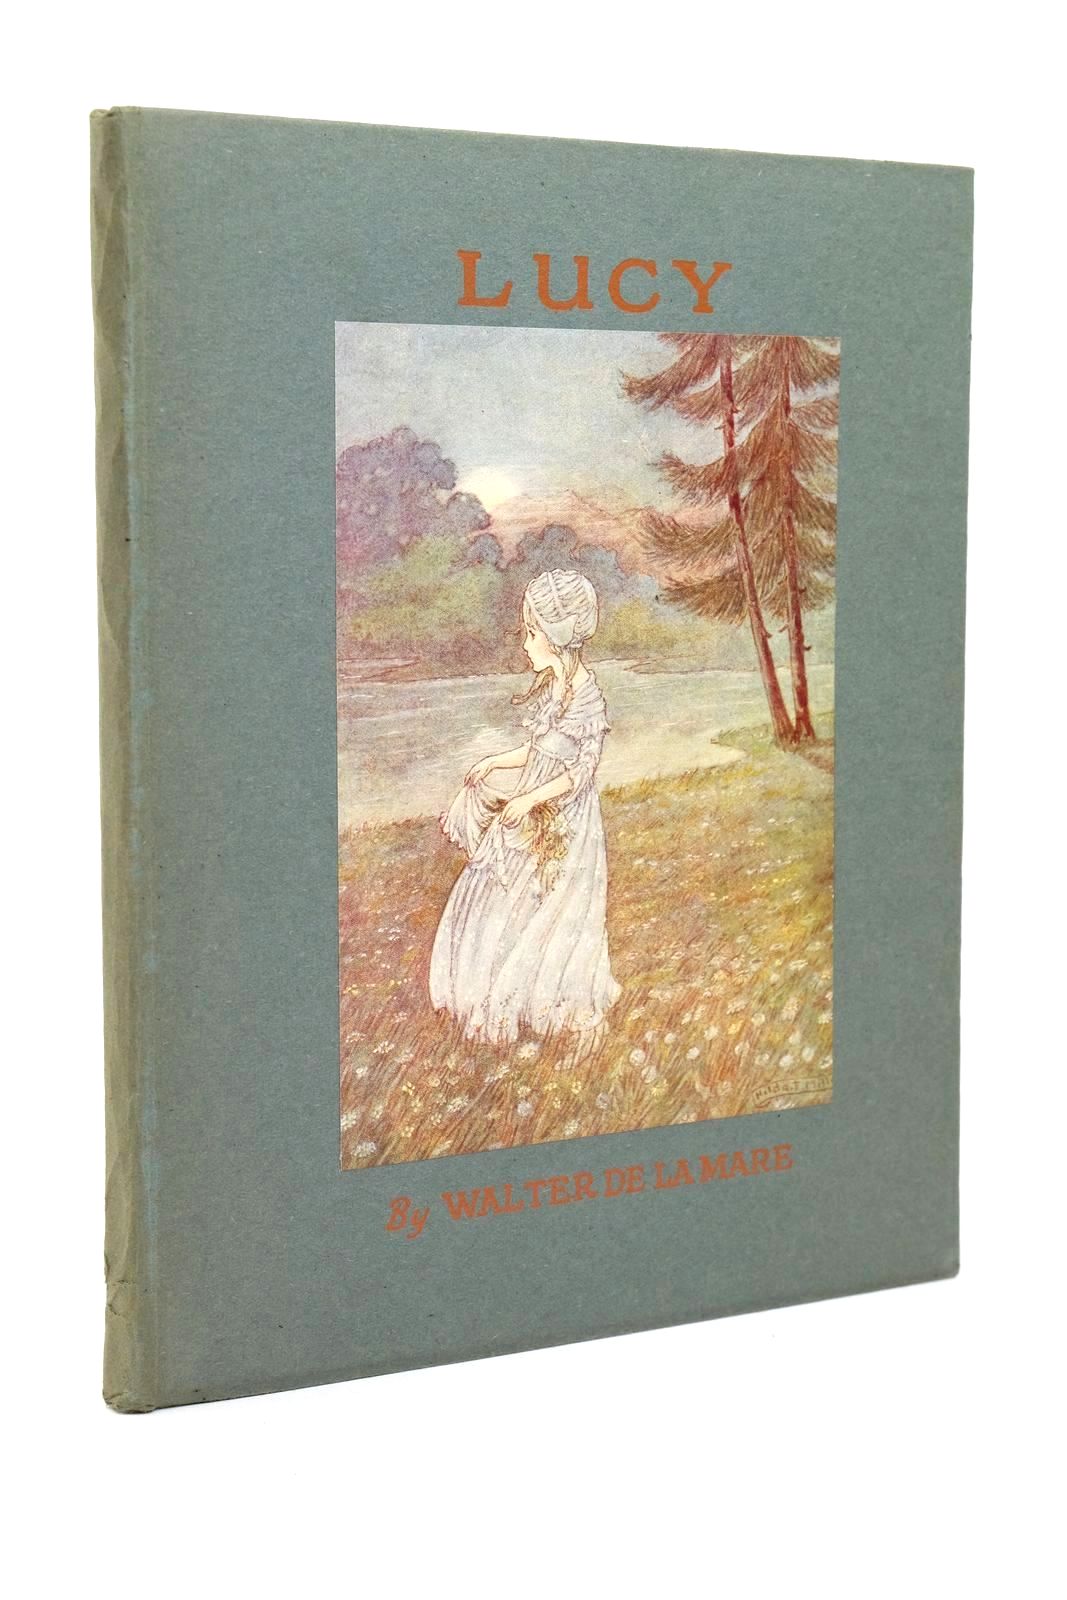 Photo of LUCY written by De La Mare, Walter illustrated by Miller, Hilda T. published by Basil Blackwell (STOCK CODE: 1322952)  for sale by Stella & Rose's Books